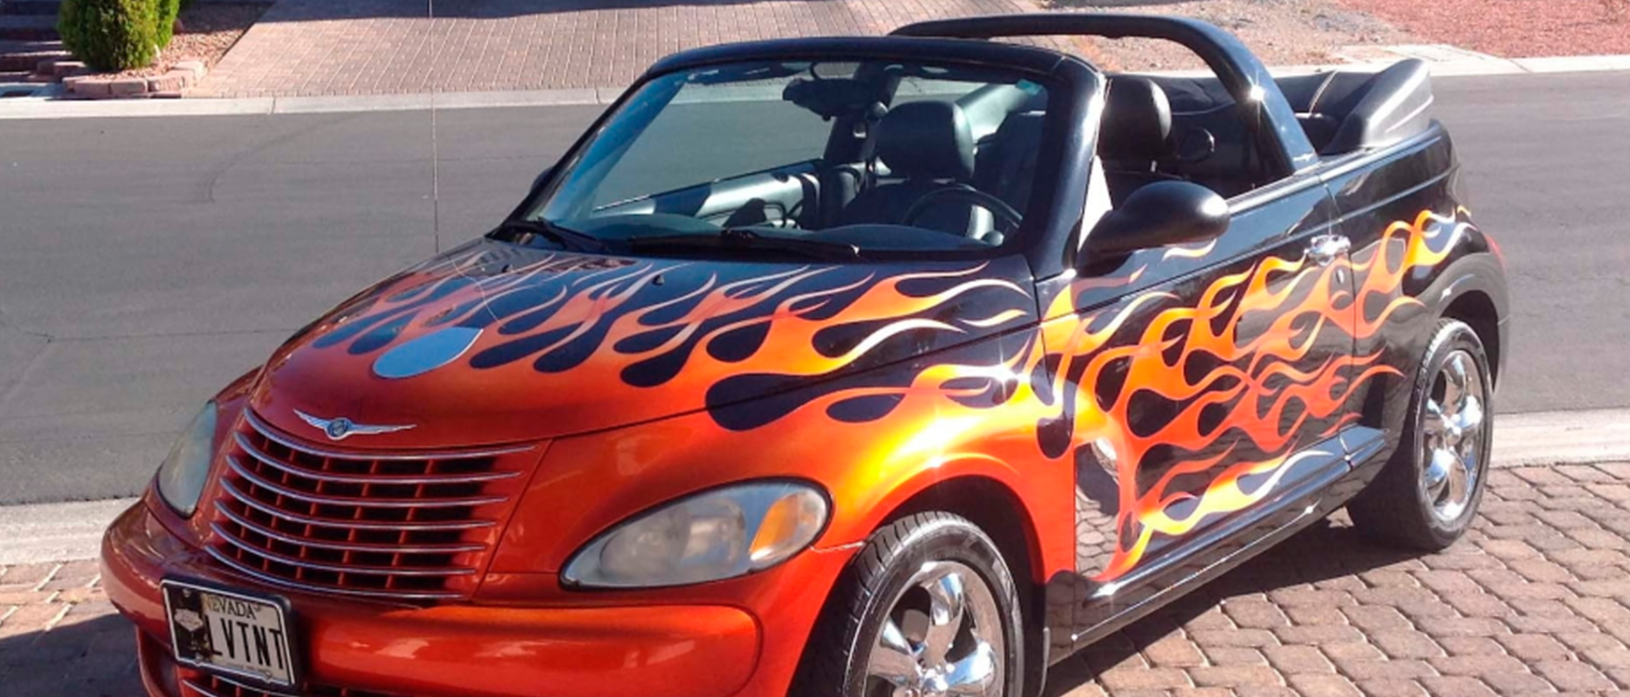 Customized PT Cruiser. Black convertible with red and orange flames